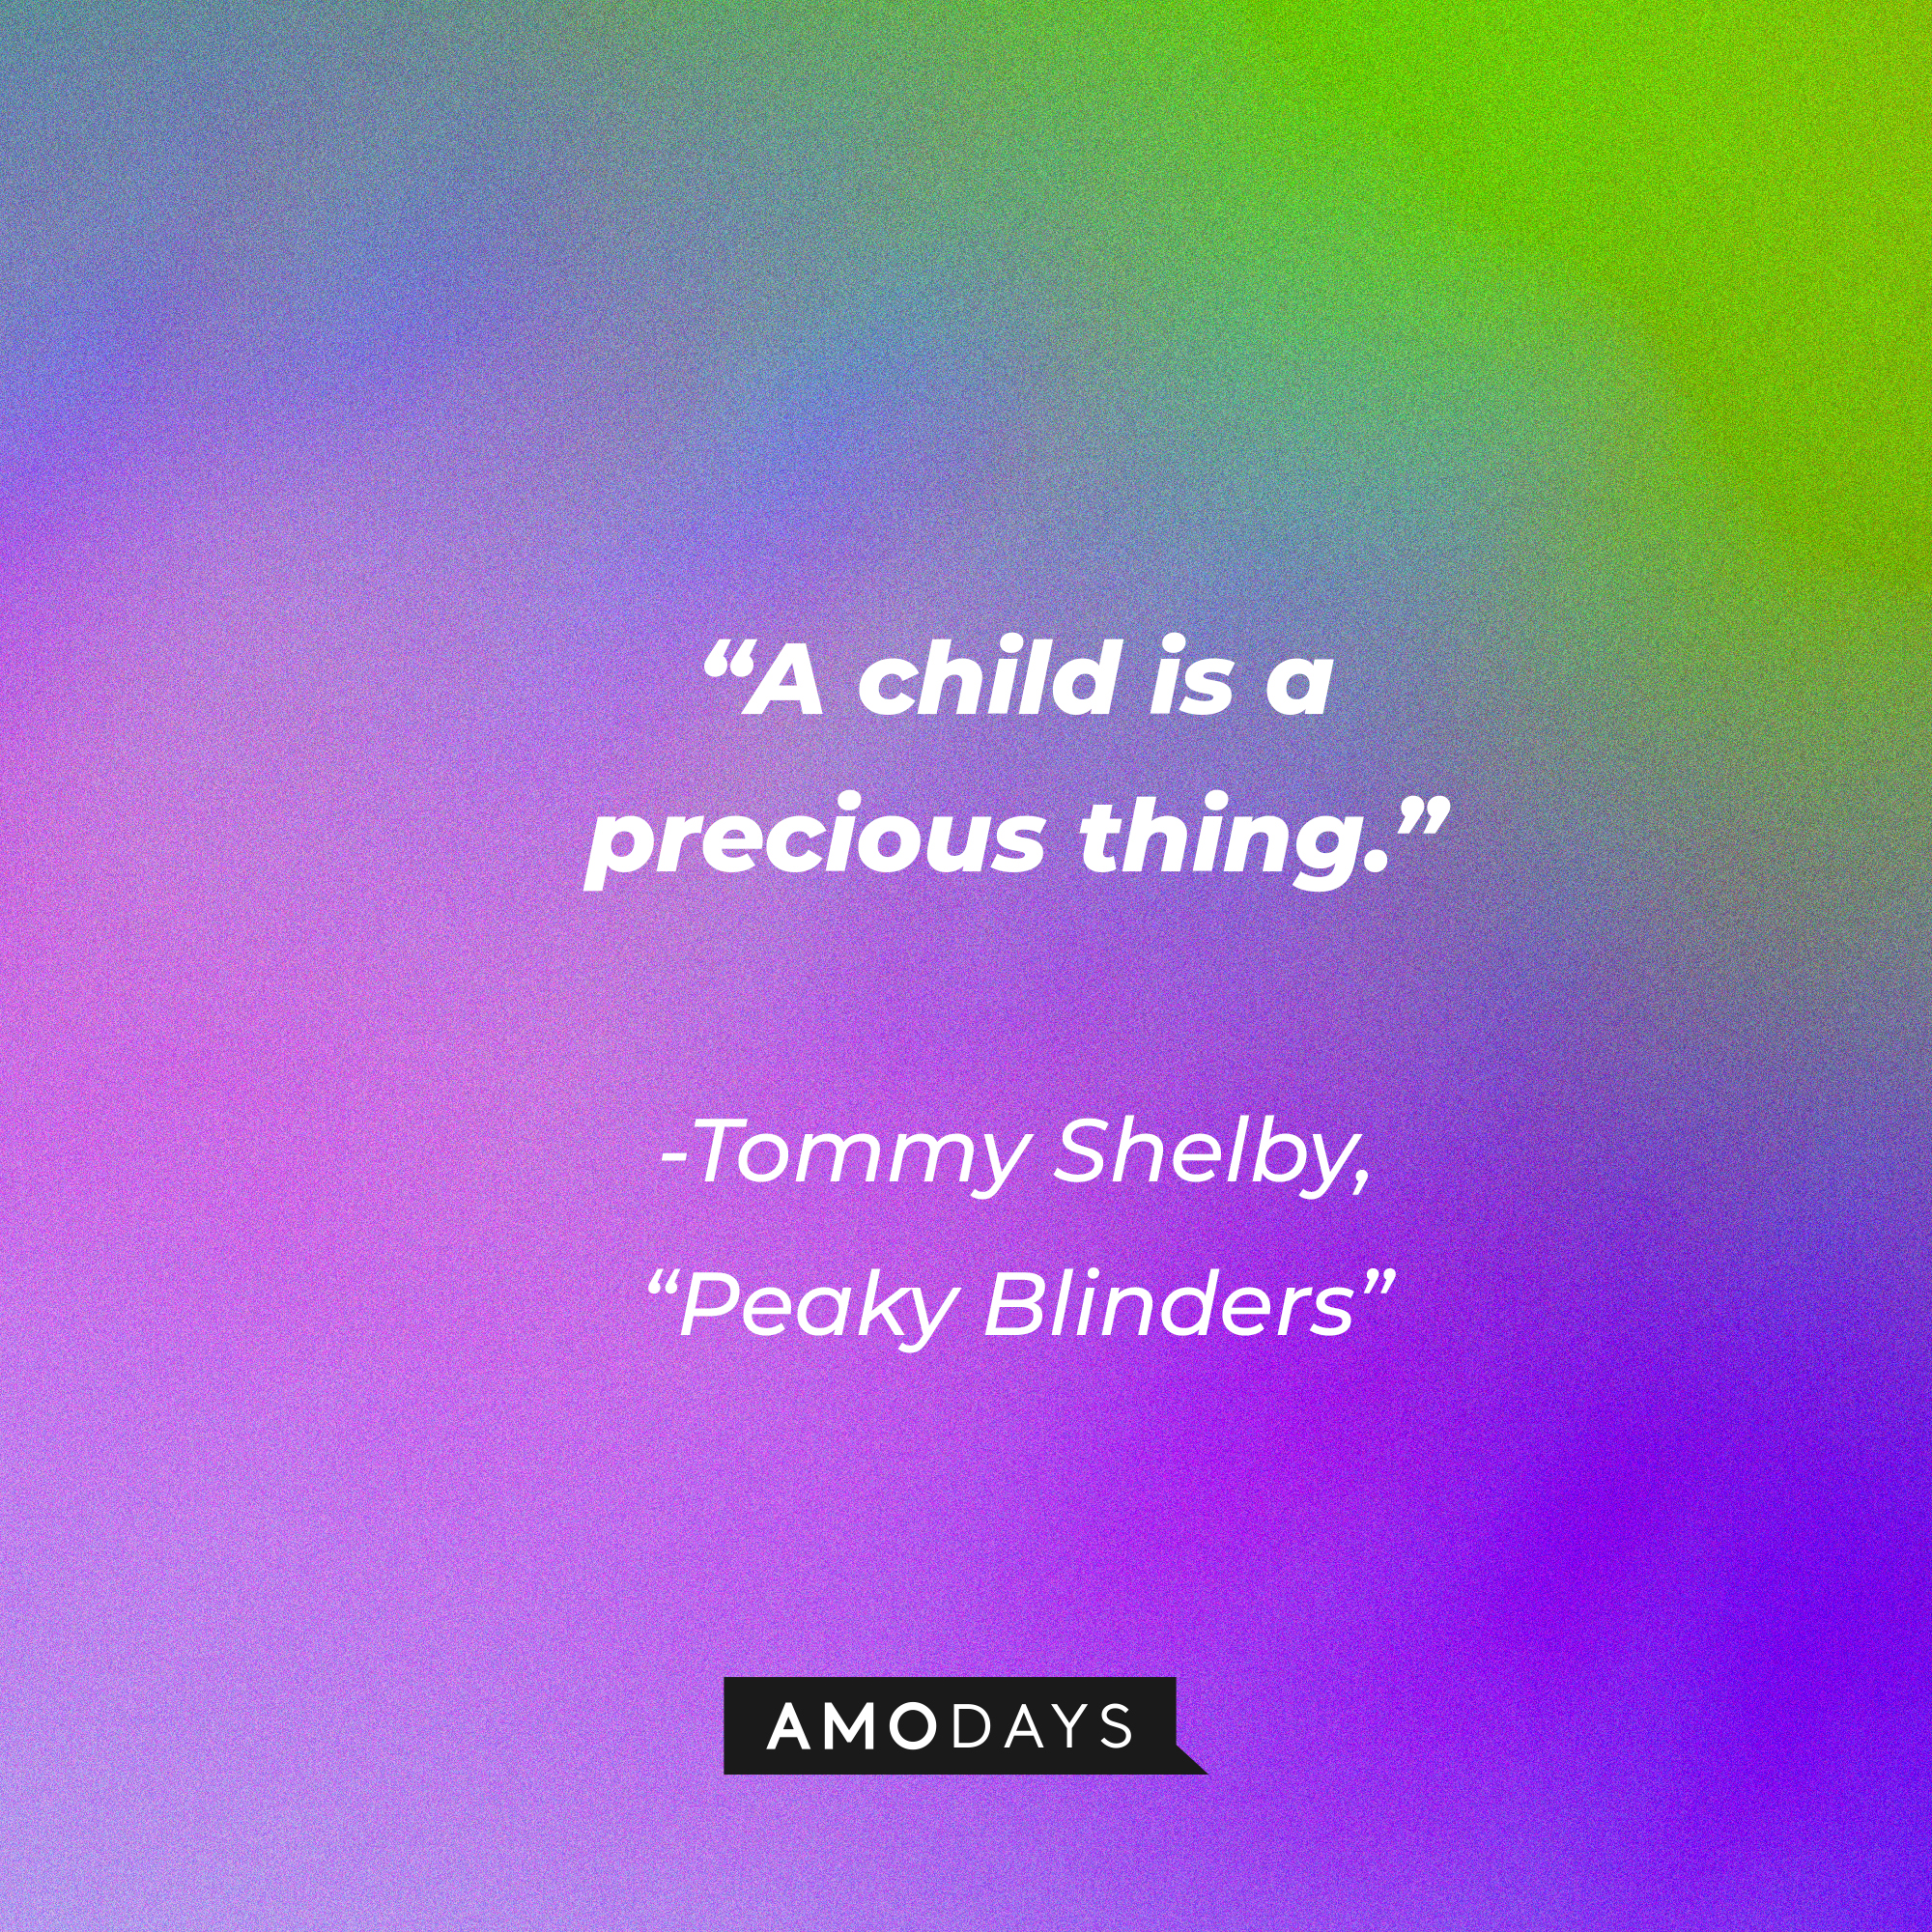 Tommy Shelby's his quote in "Peaky Blinders:" "A child is a precious thing." | Source: Facebook.com/PeakyBlinders